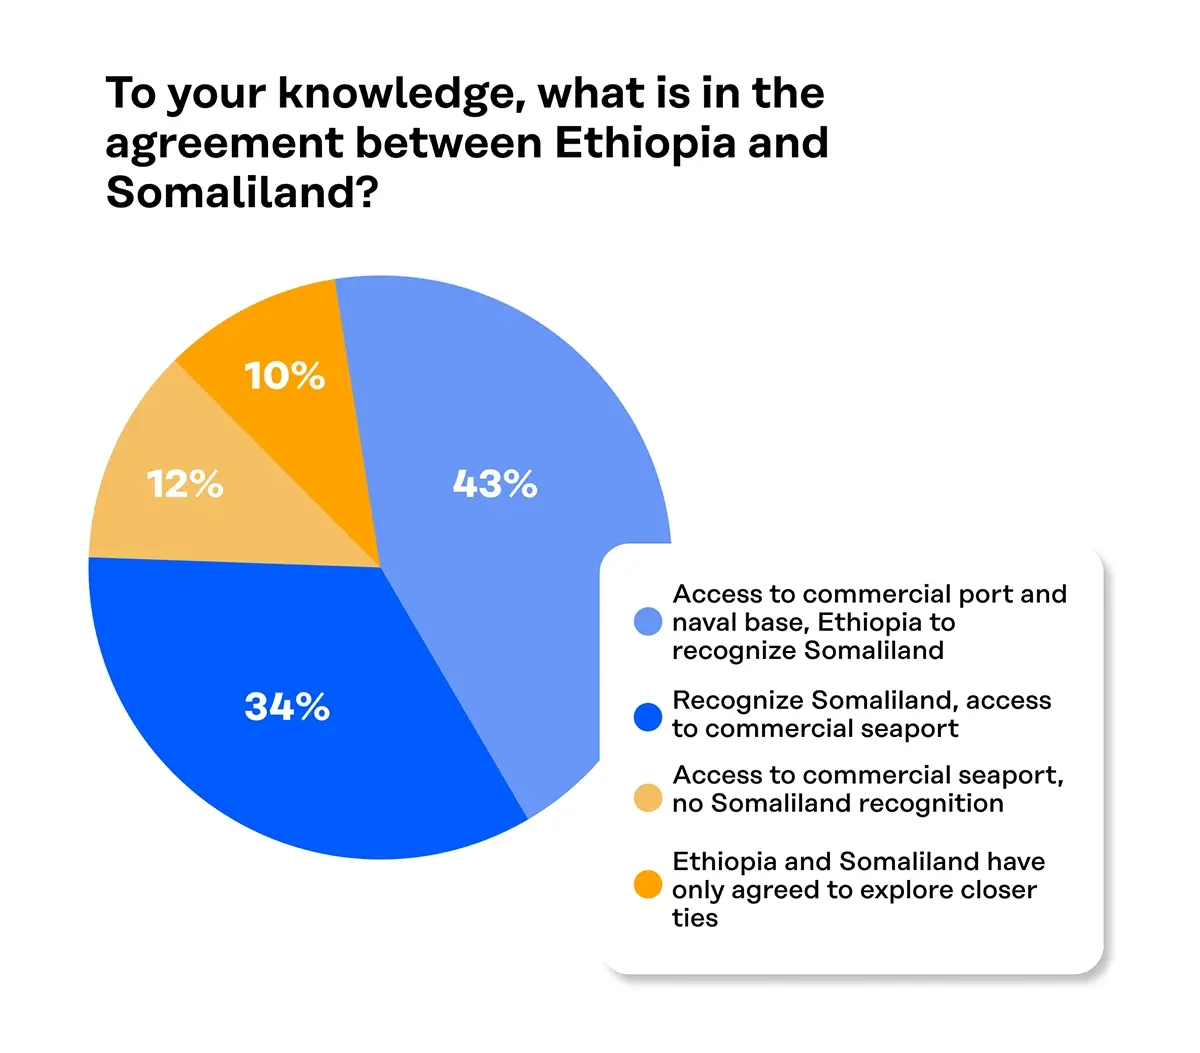 Ethiopians Mixed on Somaliland Recognition - Graph: To your knowledge, what is in the agreement between Ethiopia and Somaliland?